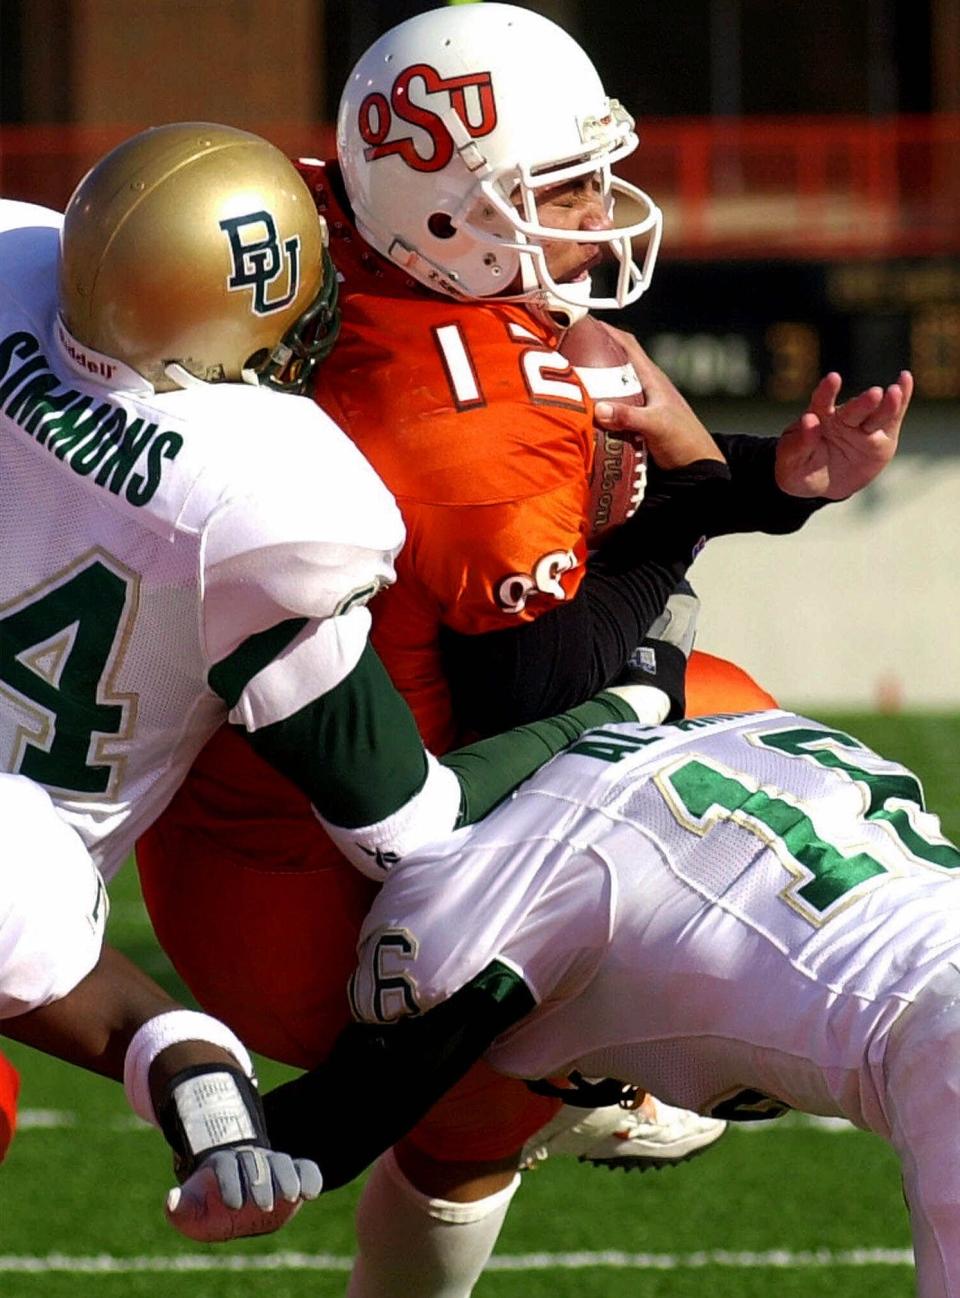 OSU quarterback Aso Pogi (12) gets hit as he crosses the goal line by Baylor's Joe Simmons (94) and Samir Al-Amin (16) on Nov. 18, 2000, in Stillwater, Okla. Pogi scored four rushing touchdowns as Oklahoma State routed Baylor 50-22.